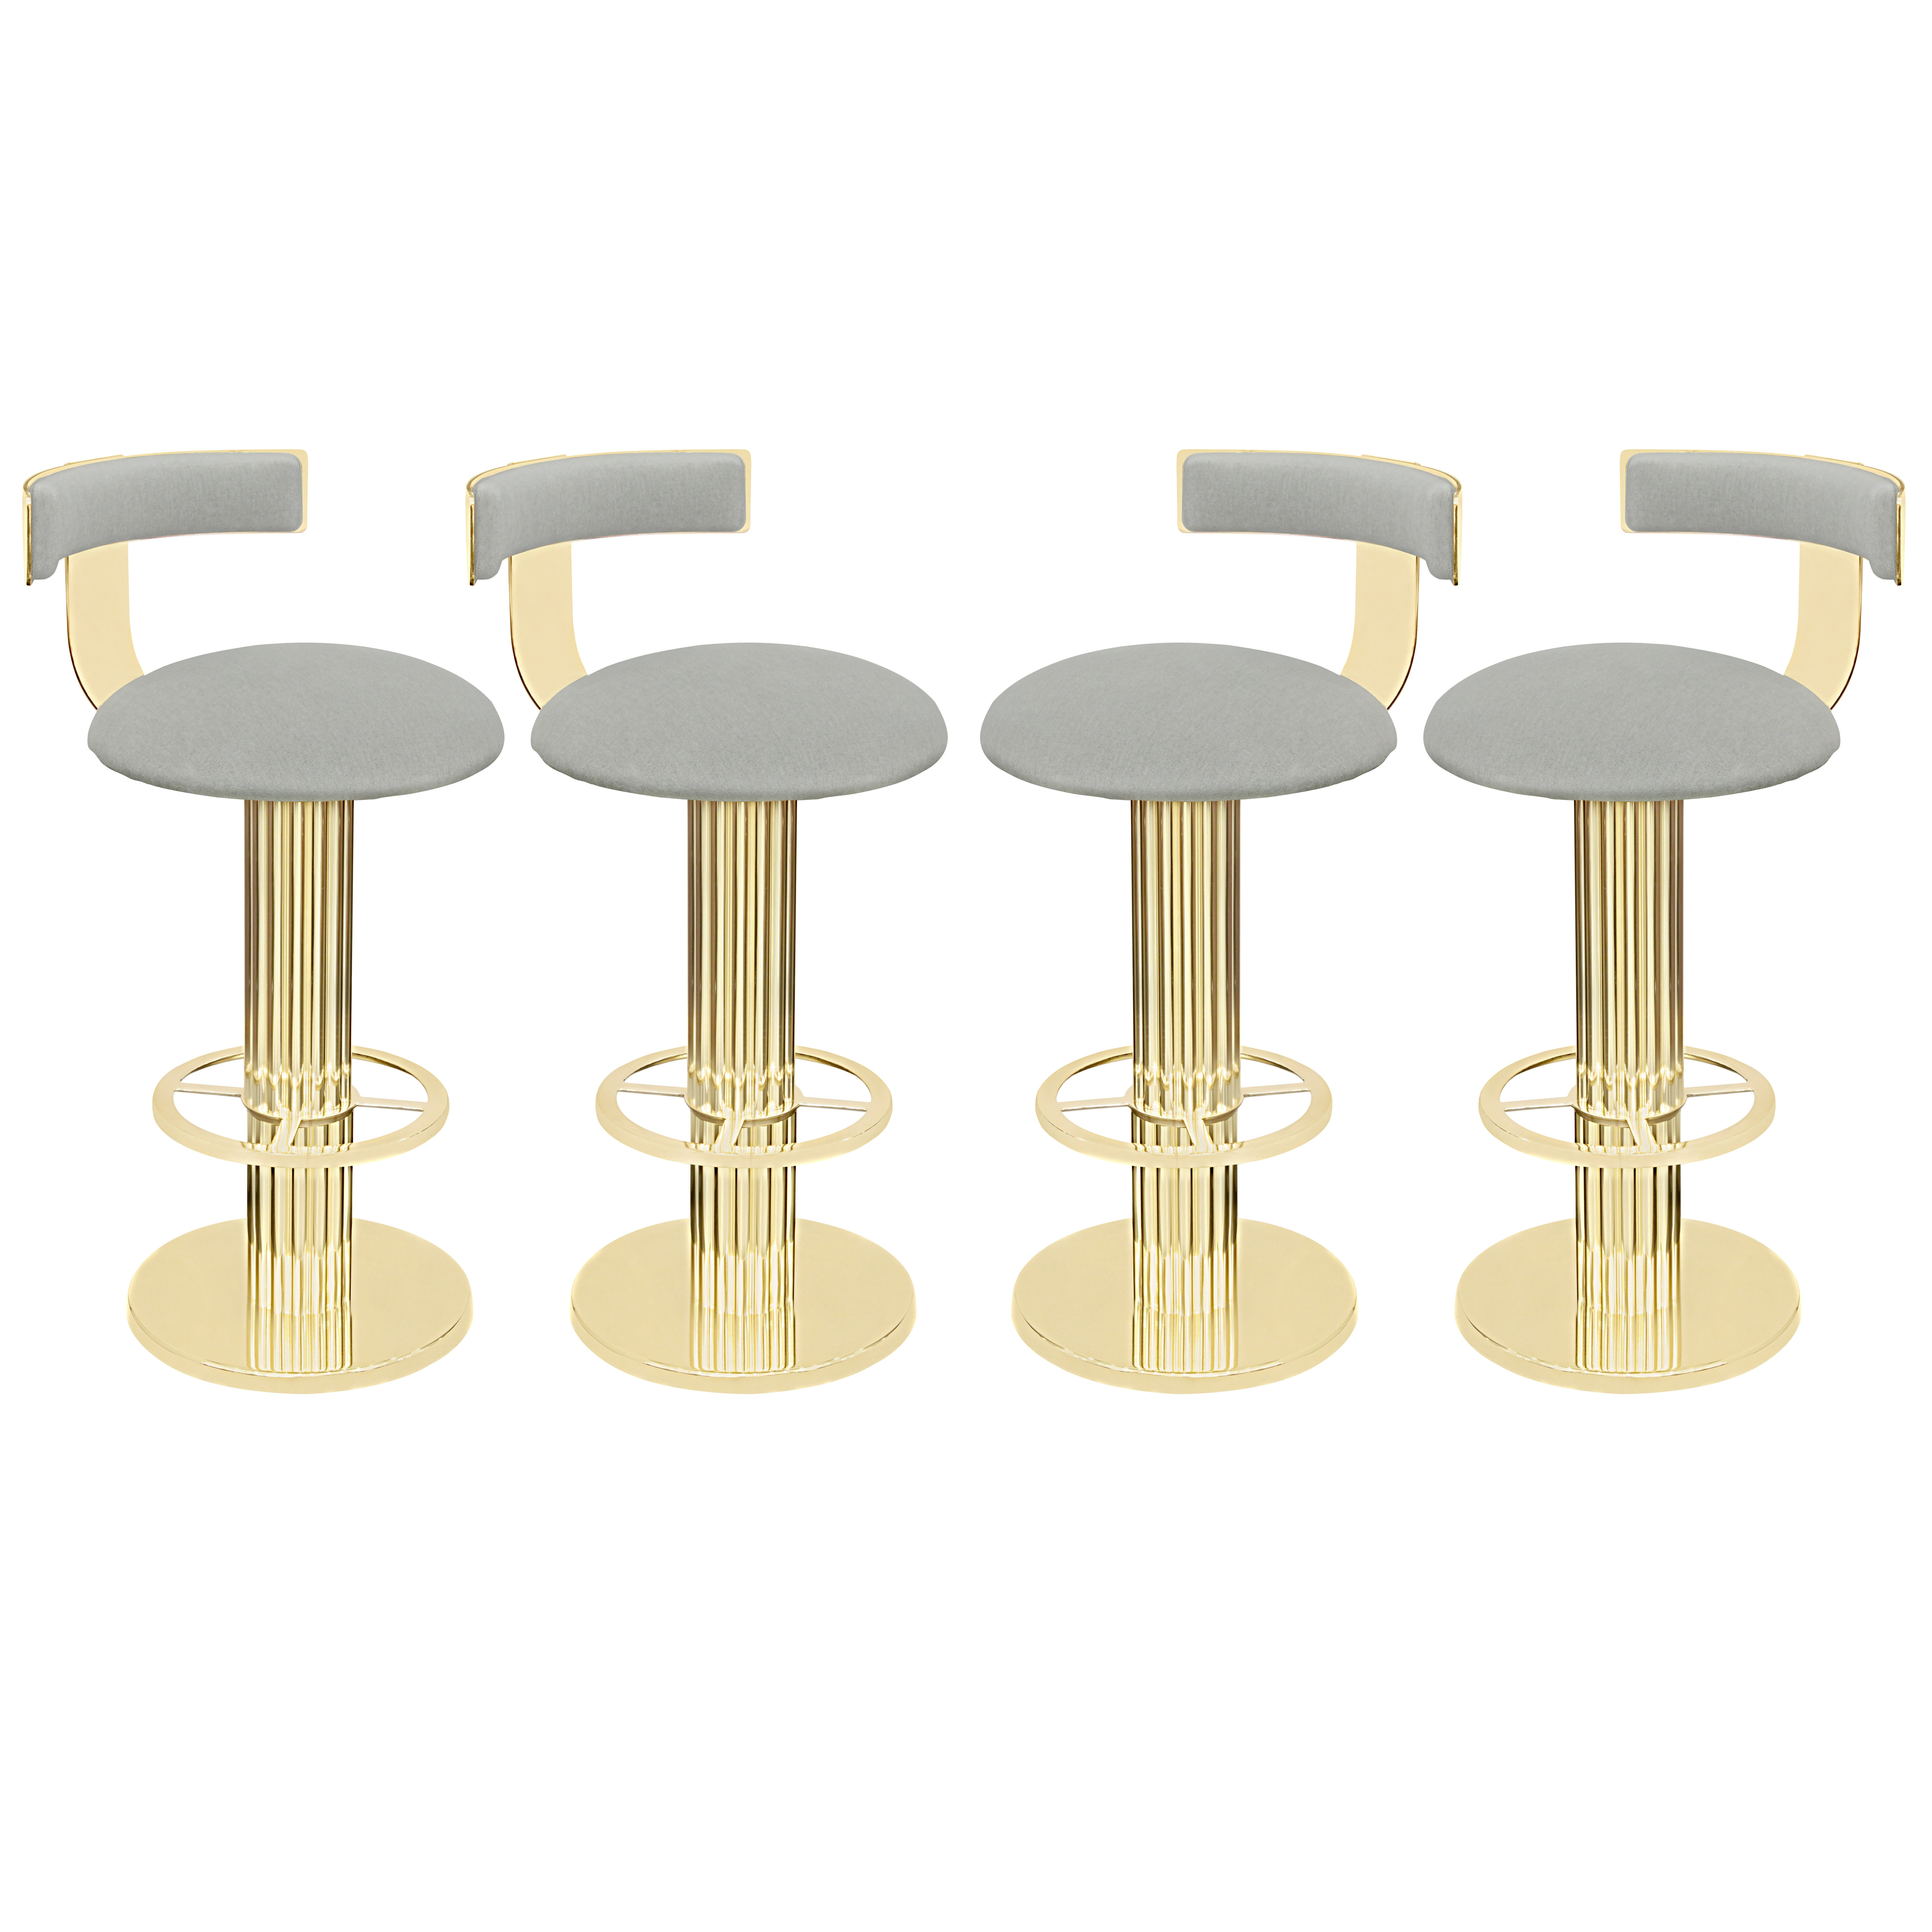 Set of Four "Excalibur Bar Stools" in Channeled Brass by Design For Leisure